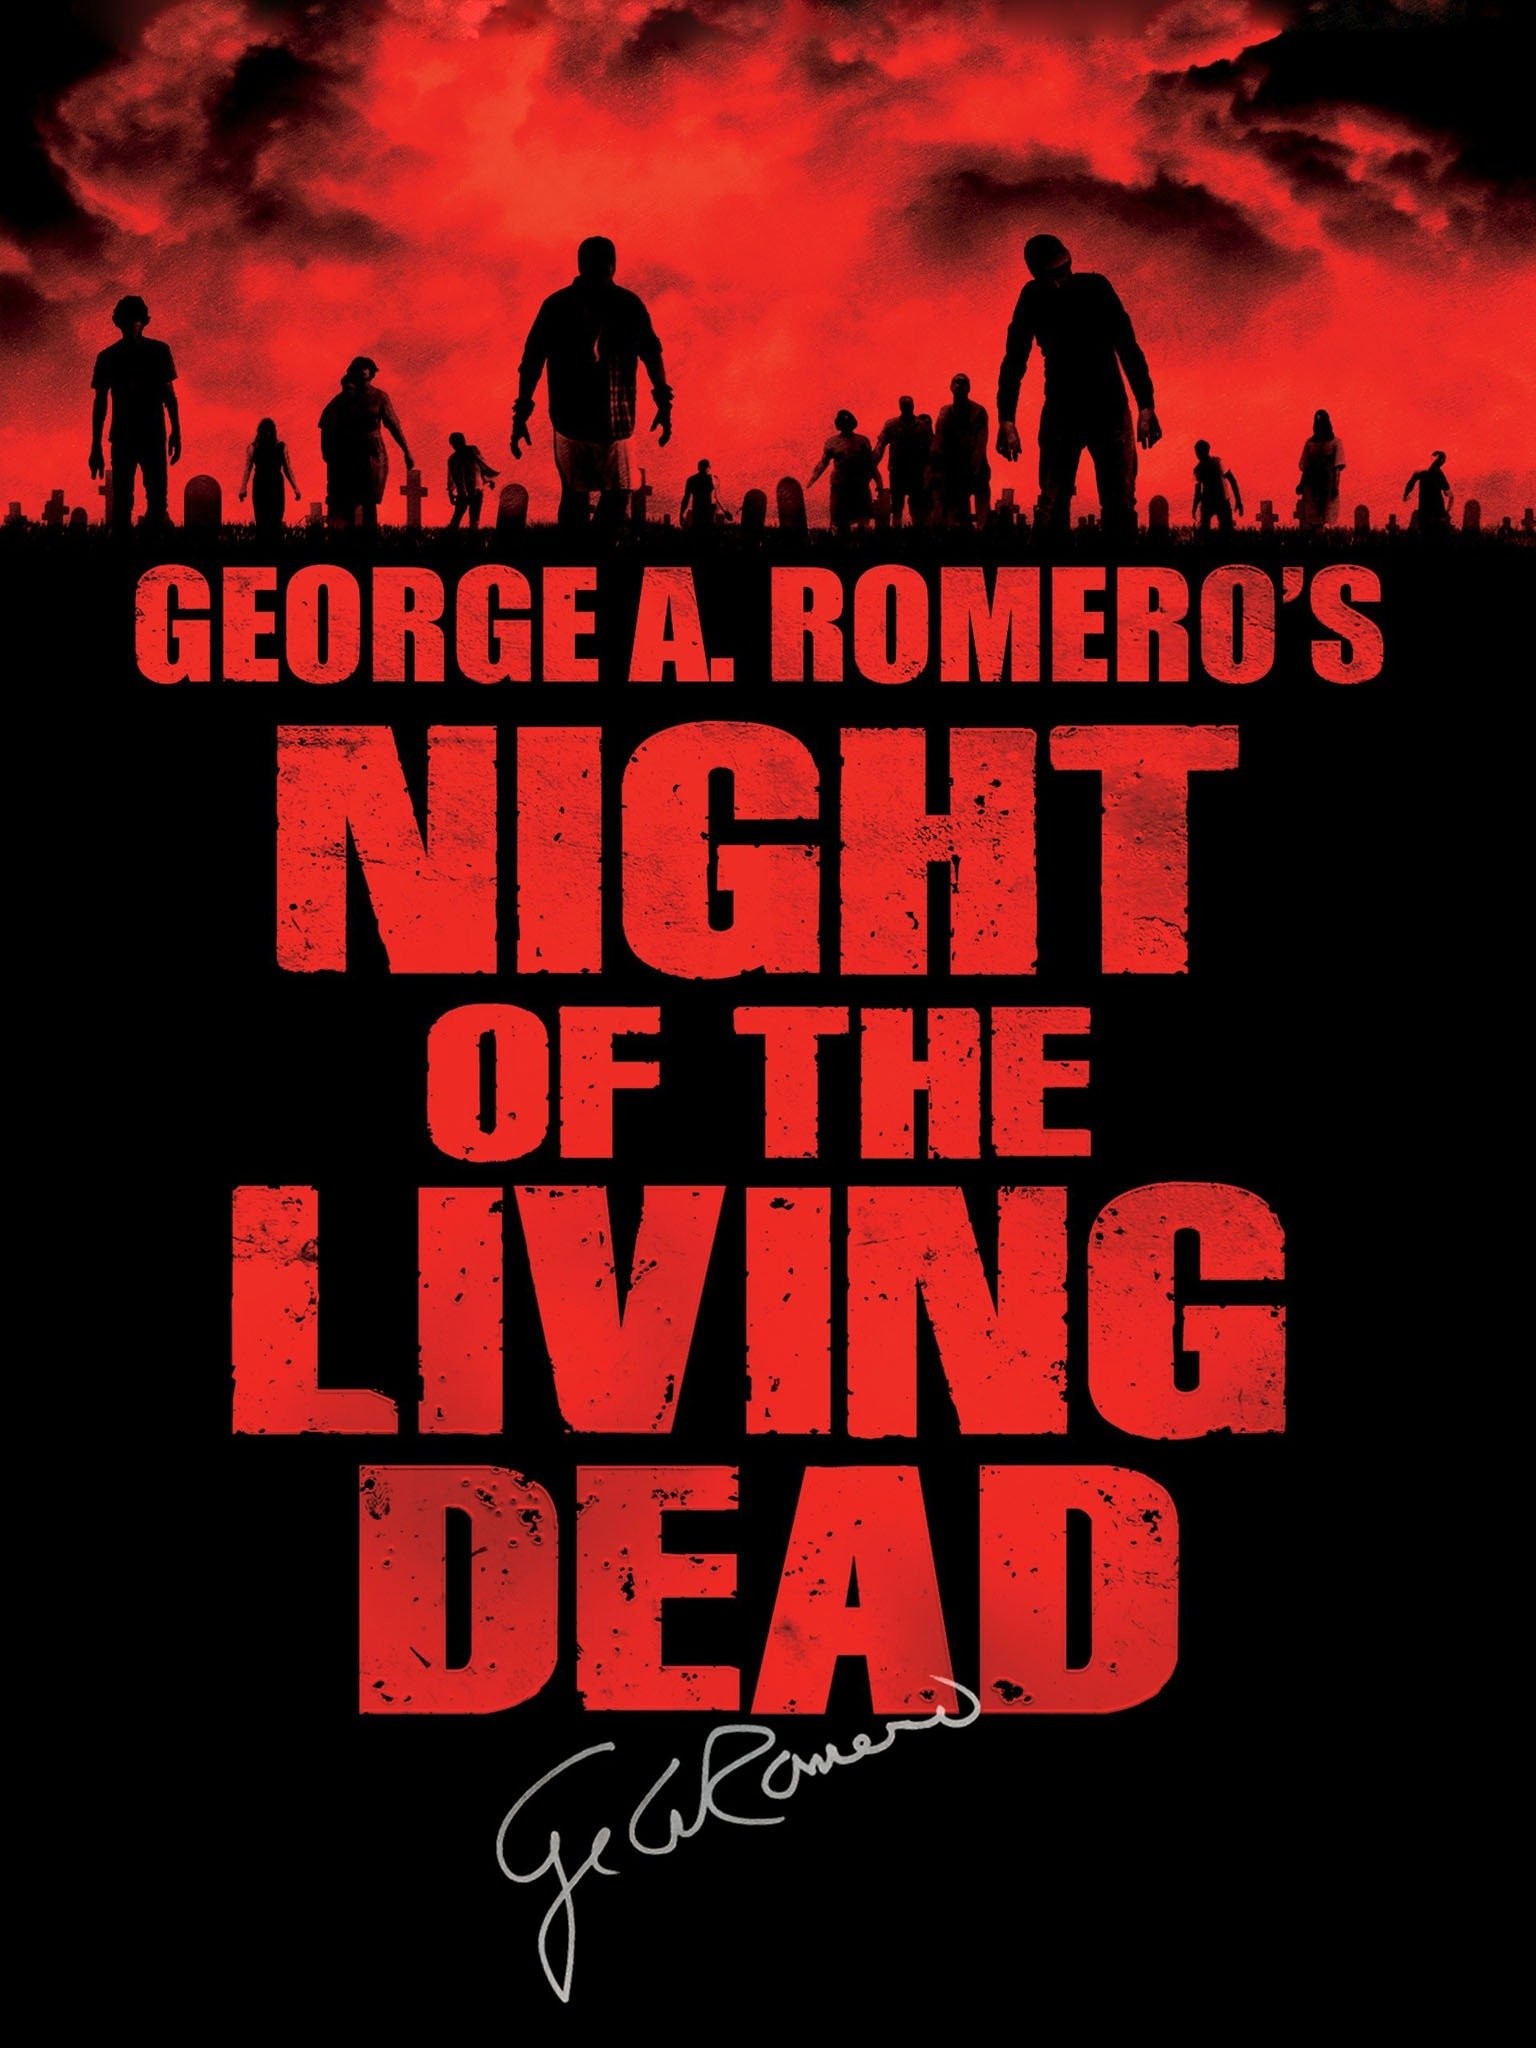 Strange Dark Stories: Nights and Days of the Living Dead